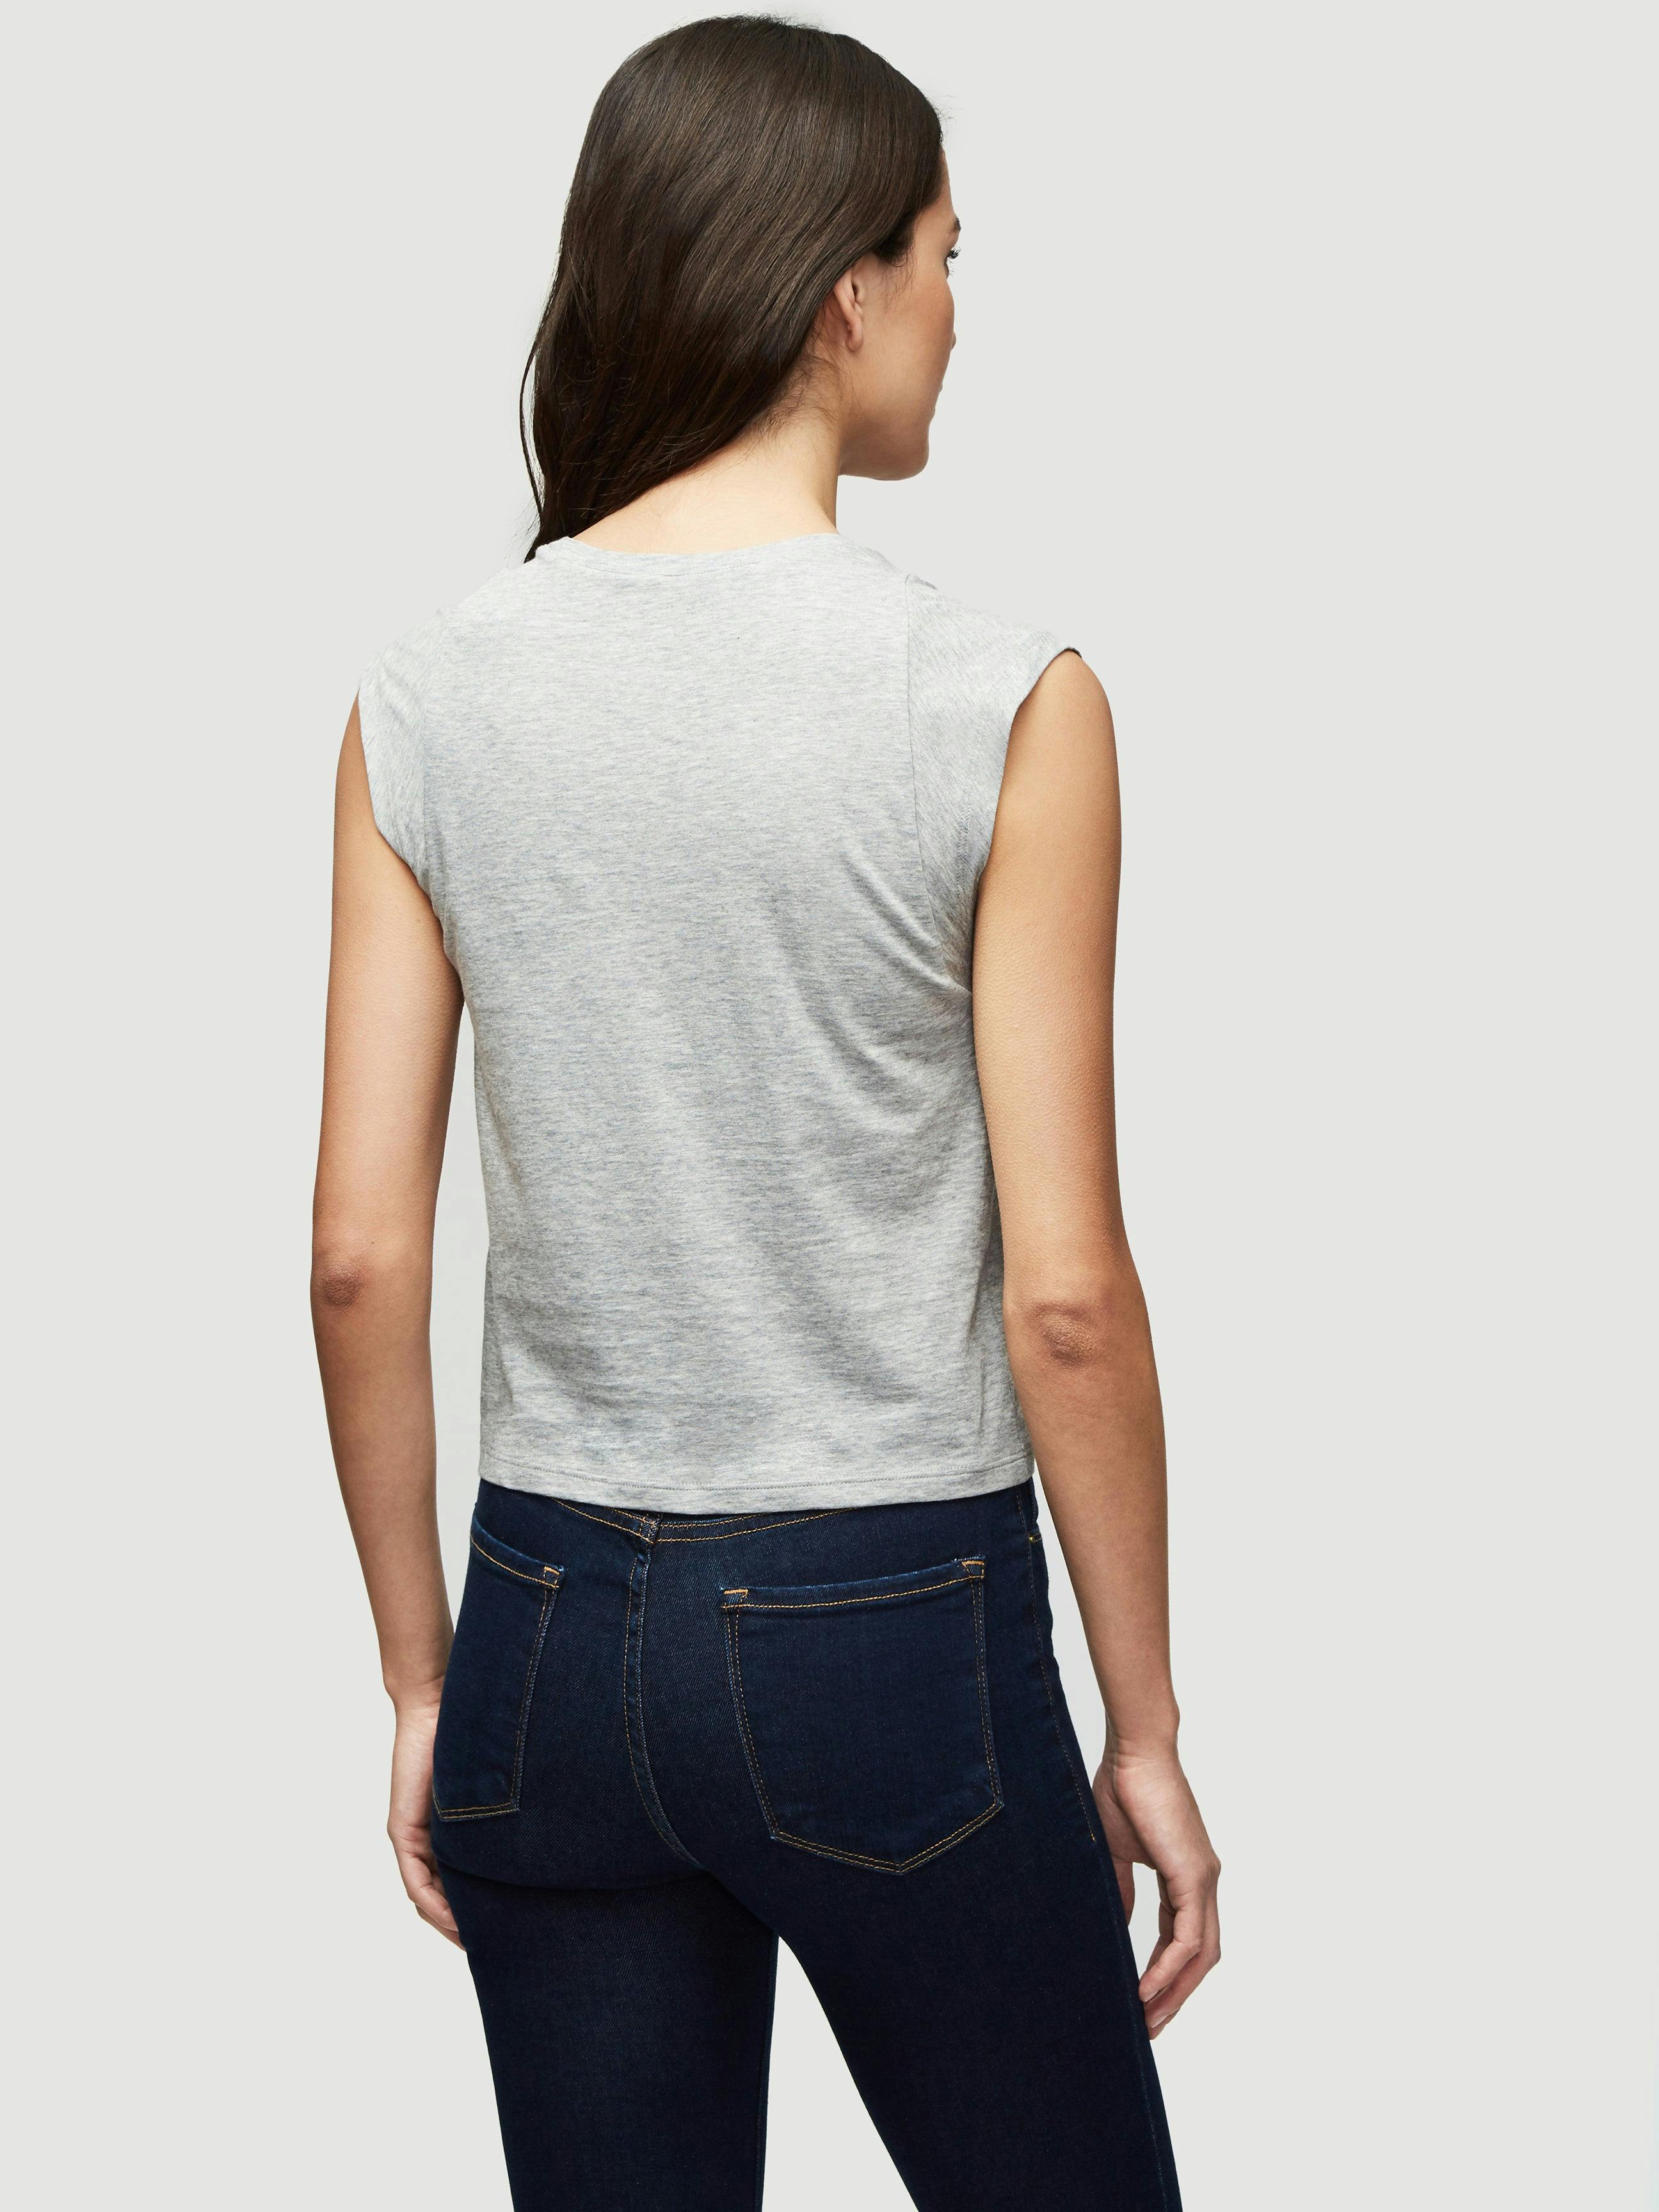 tee back view